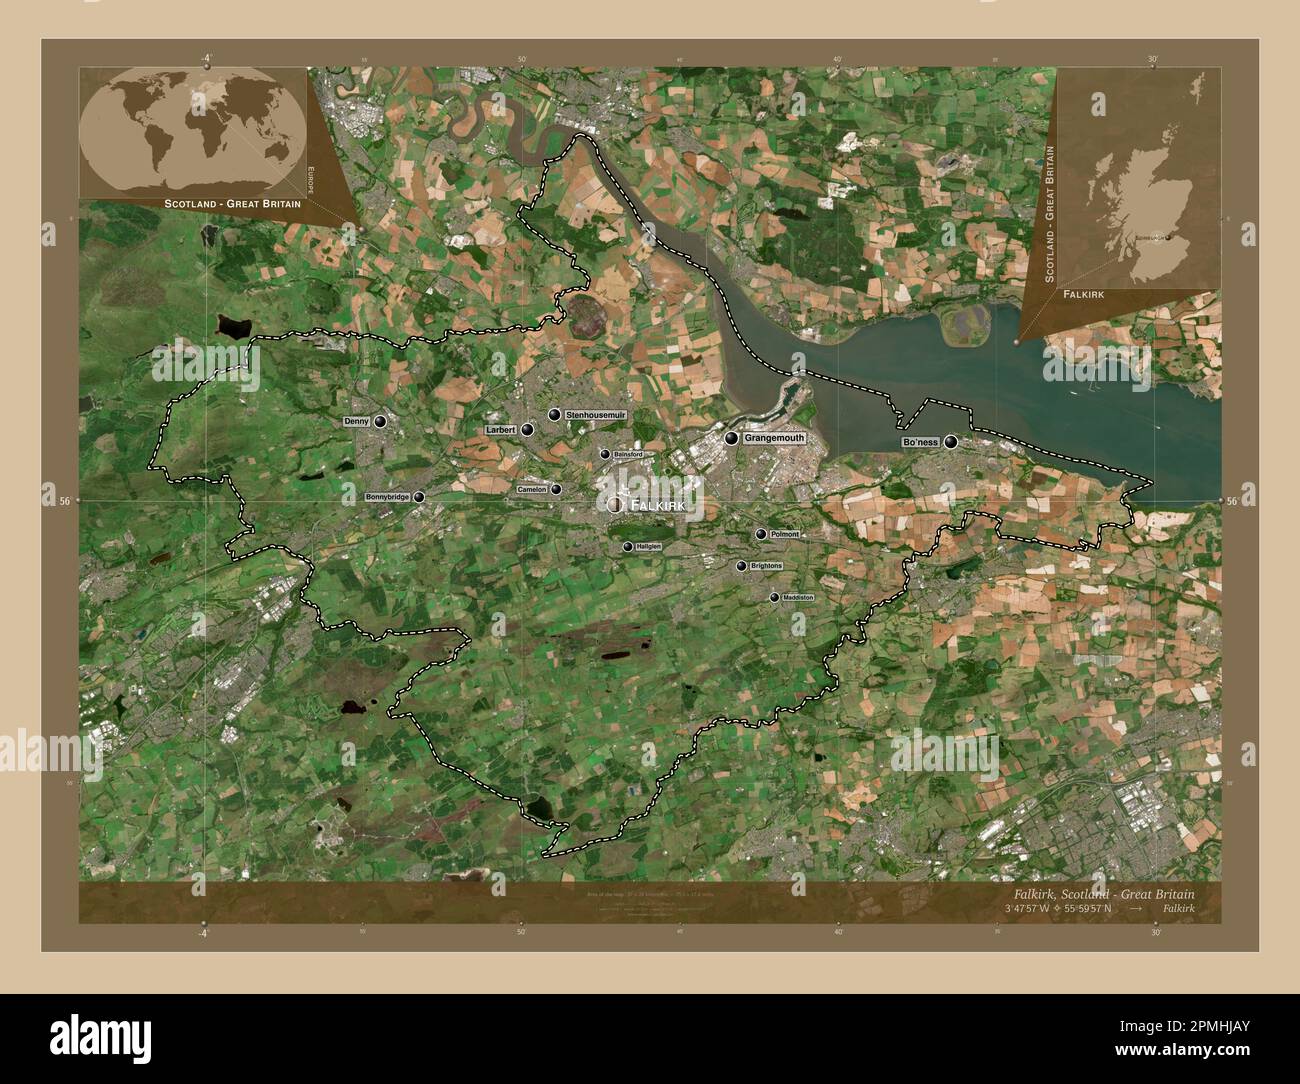 Falkirk, region of Scotland - Great Britain. Low resolution satellite map. Locations and names of major cities of the region. Corner auxiliary locatio Stock Photo